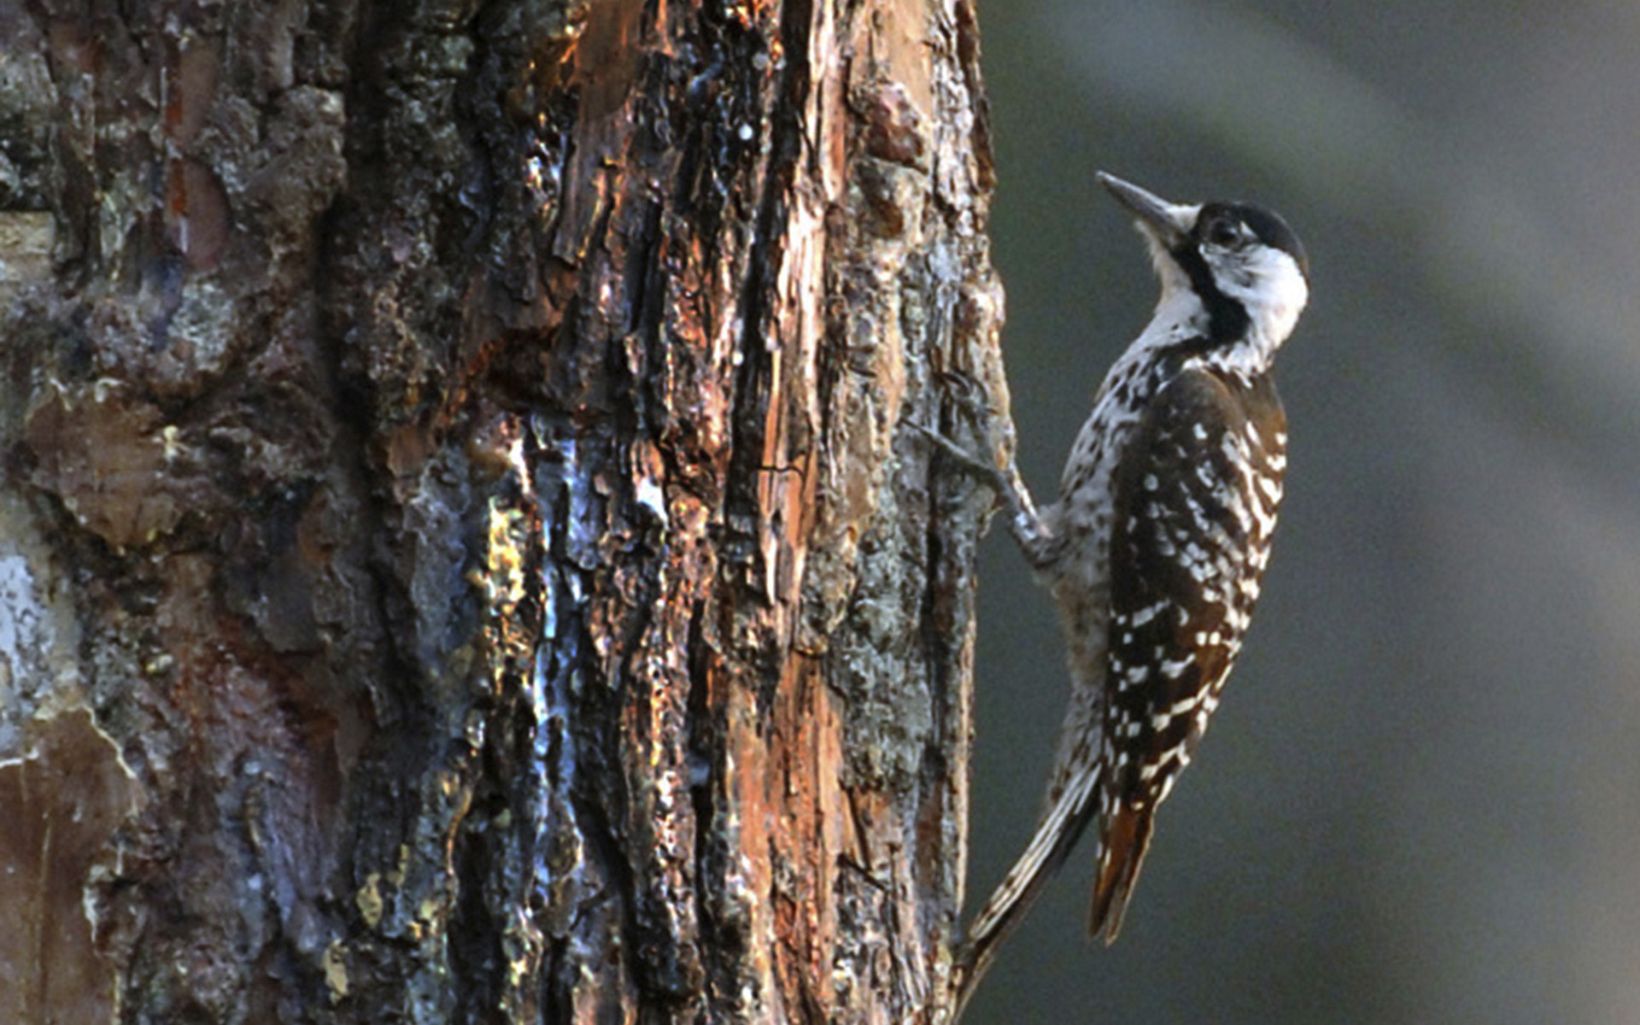 The red-cockaded woodpecker (Picoides borealis) is the only woodpecker species that nests exclusively in live trees.